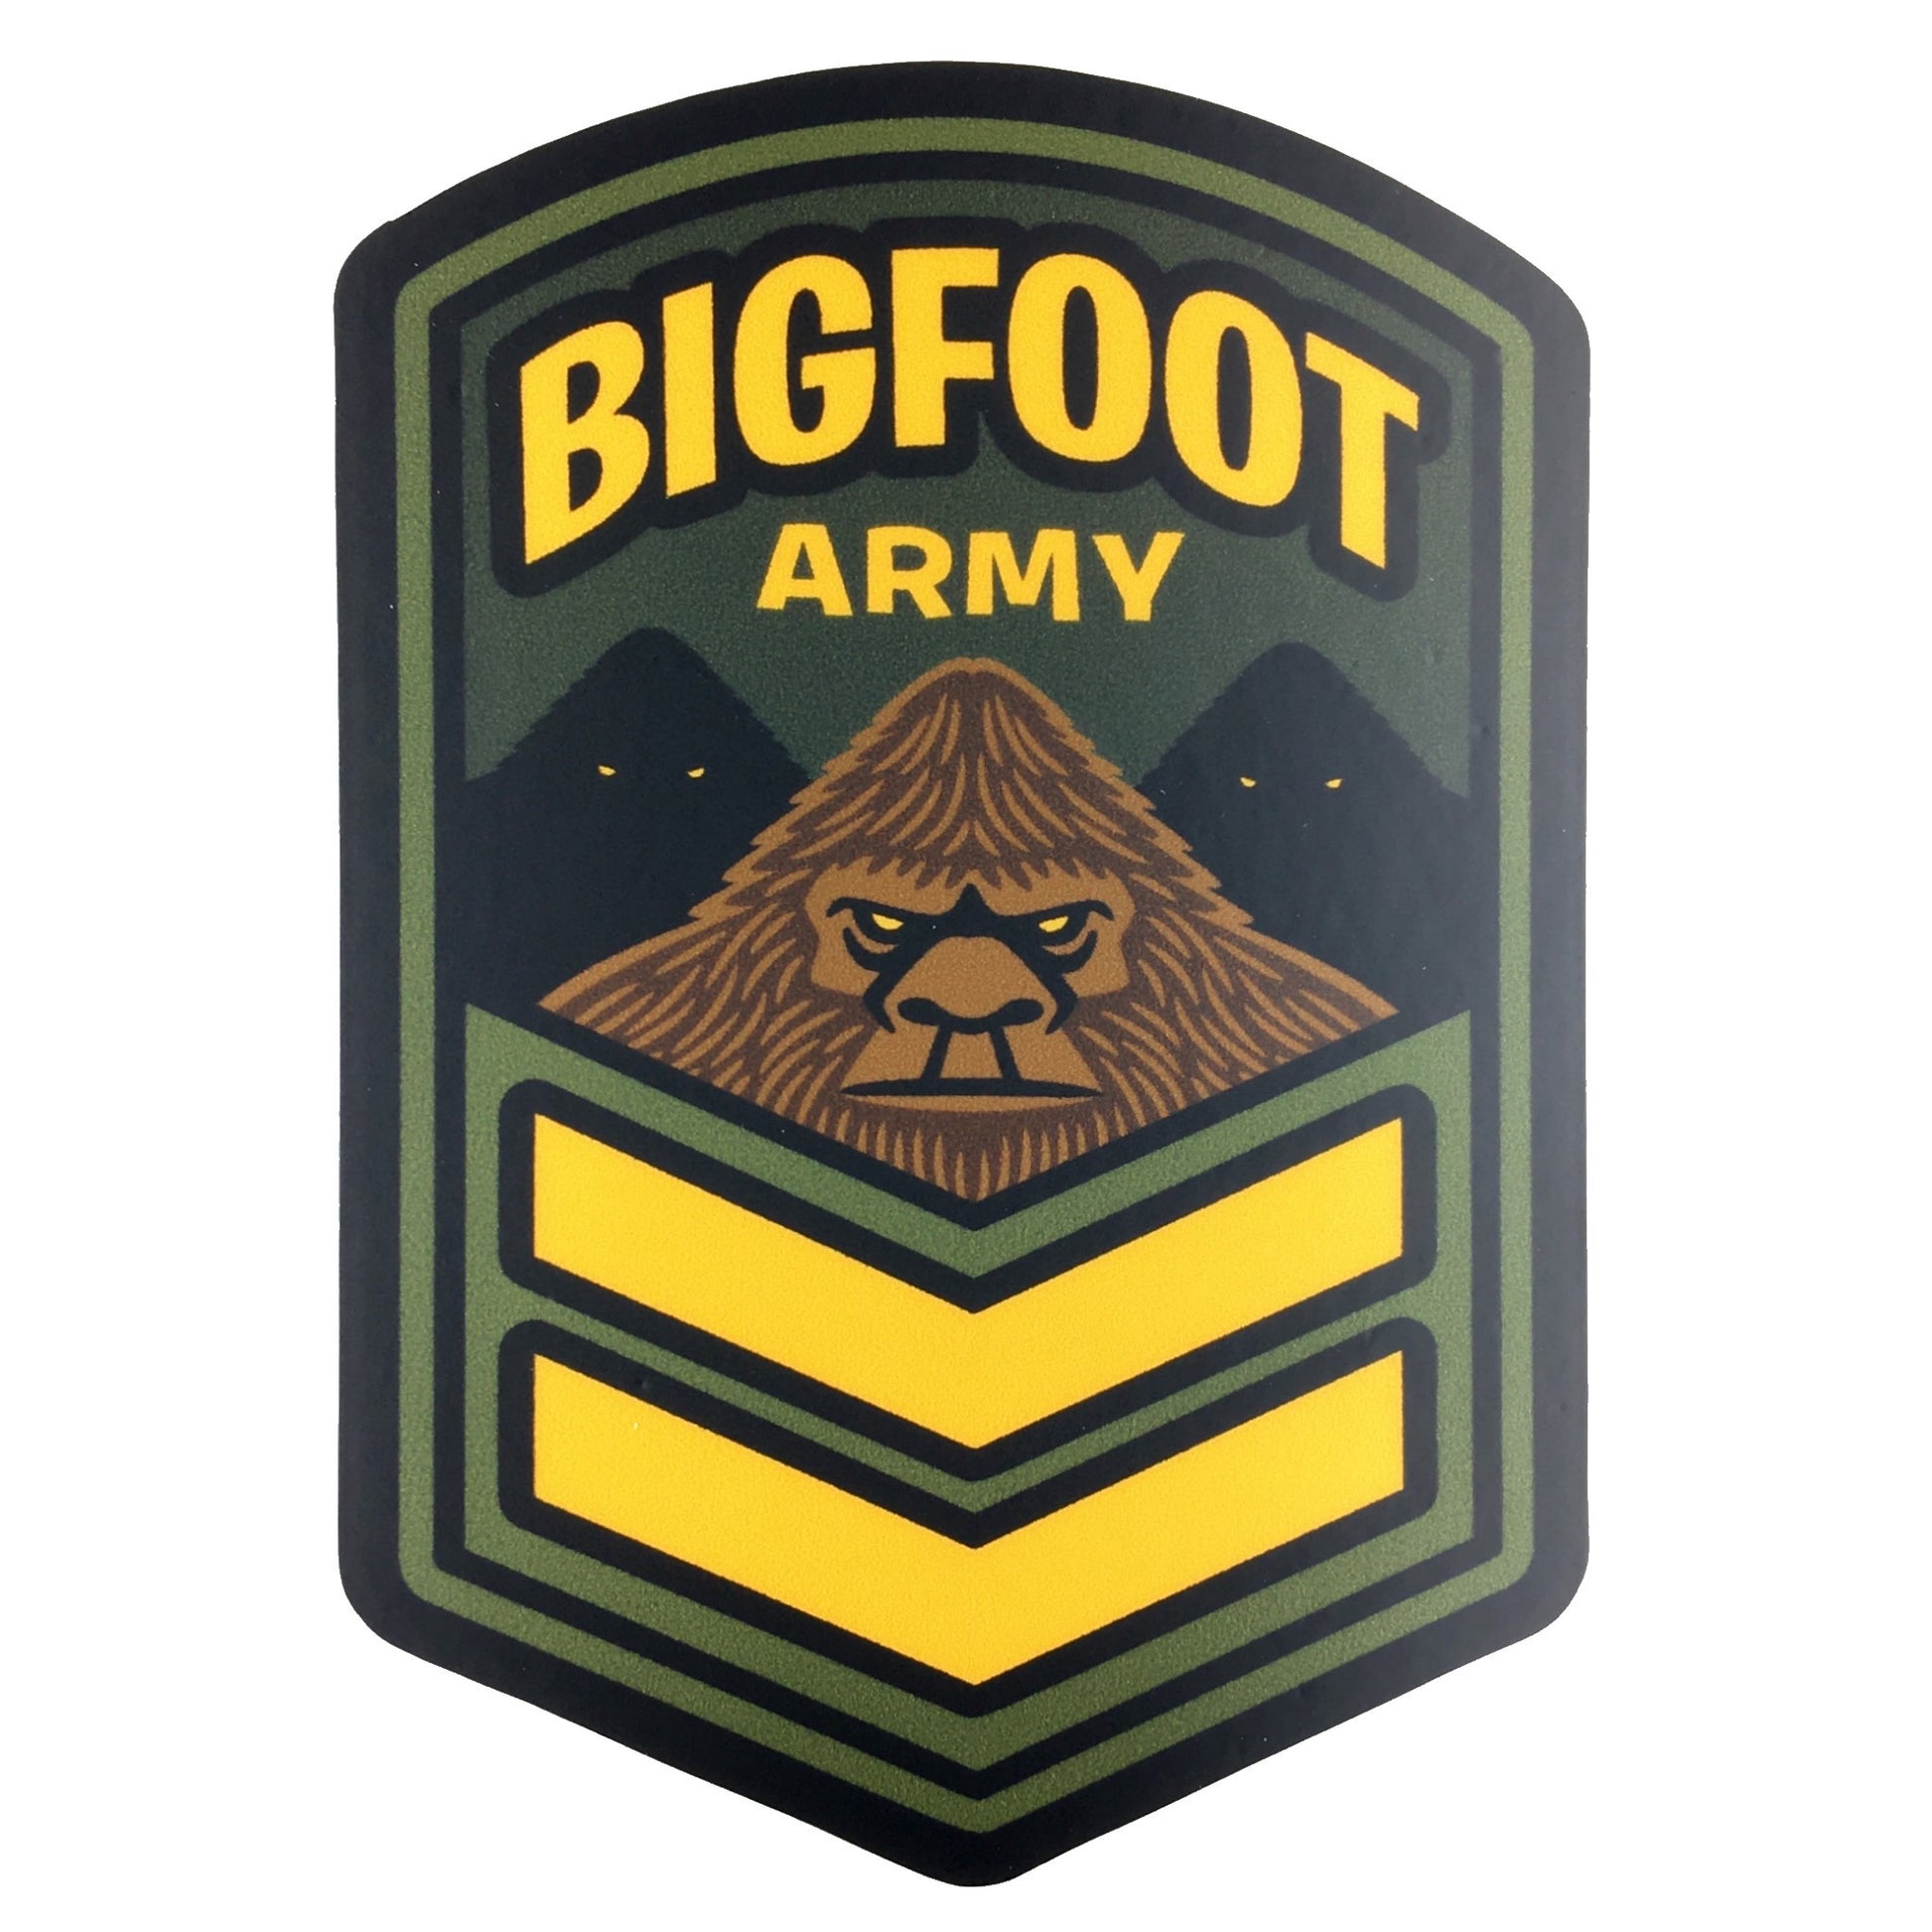 Bigfoot Army military-style shield insignia vinyl sticker by Monsterologist